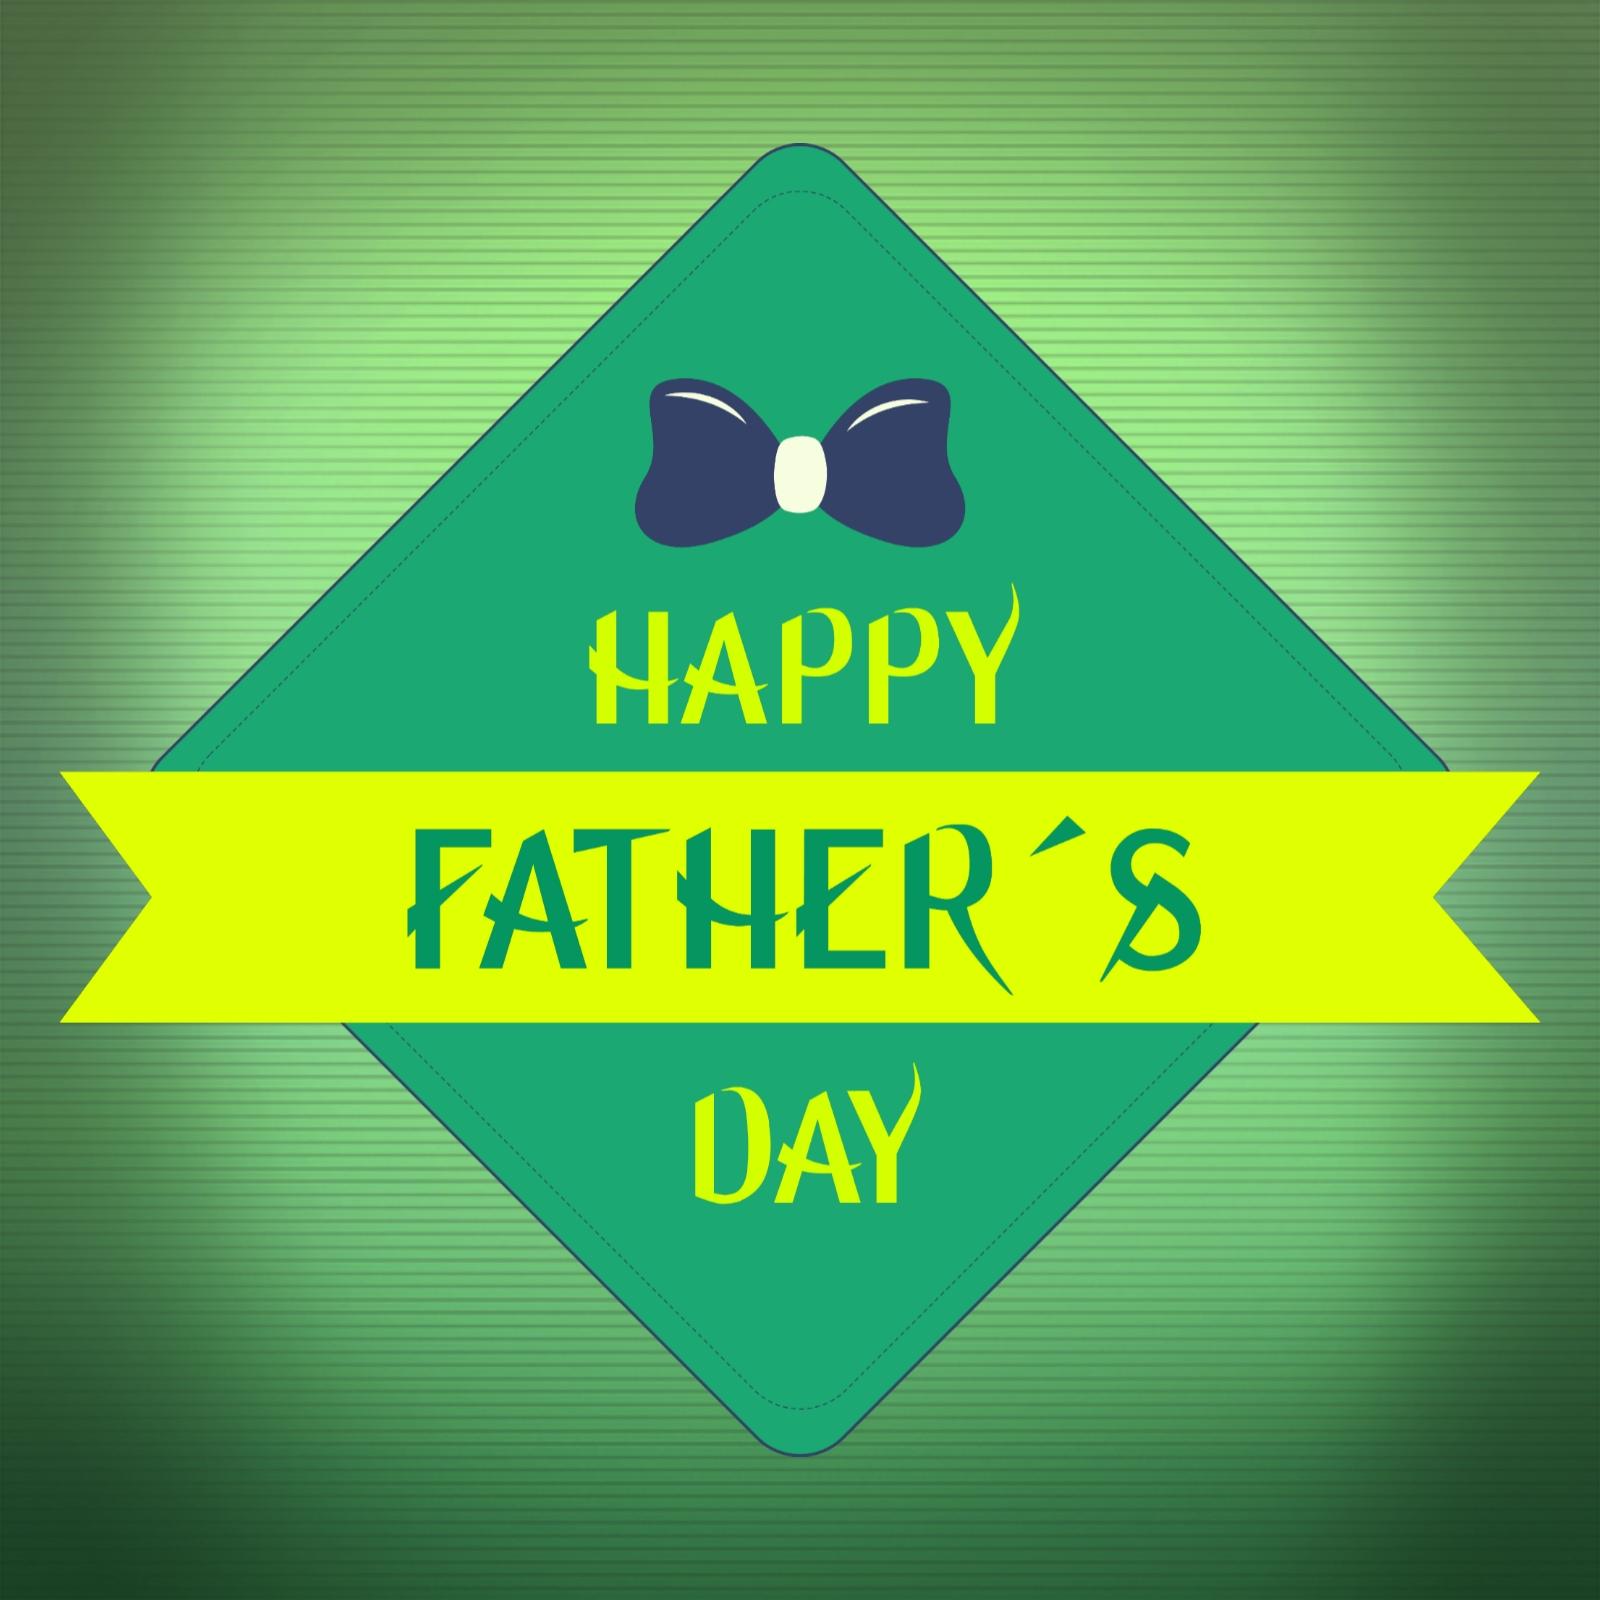 Friend Happy Fathers Day Images